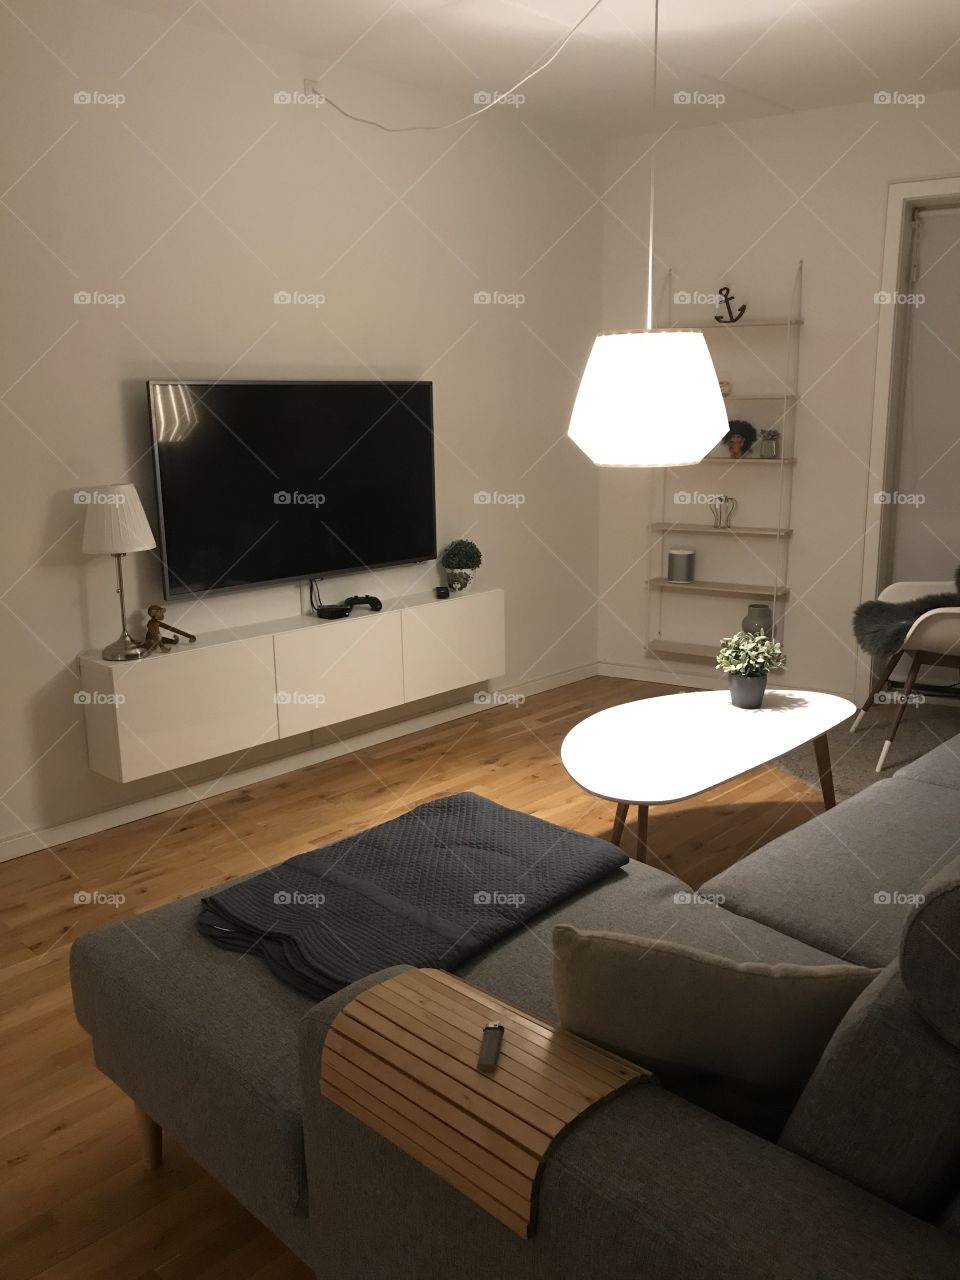 At home, television, Philips hue, cozy